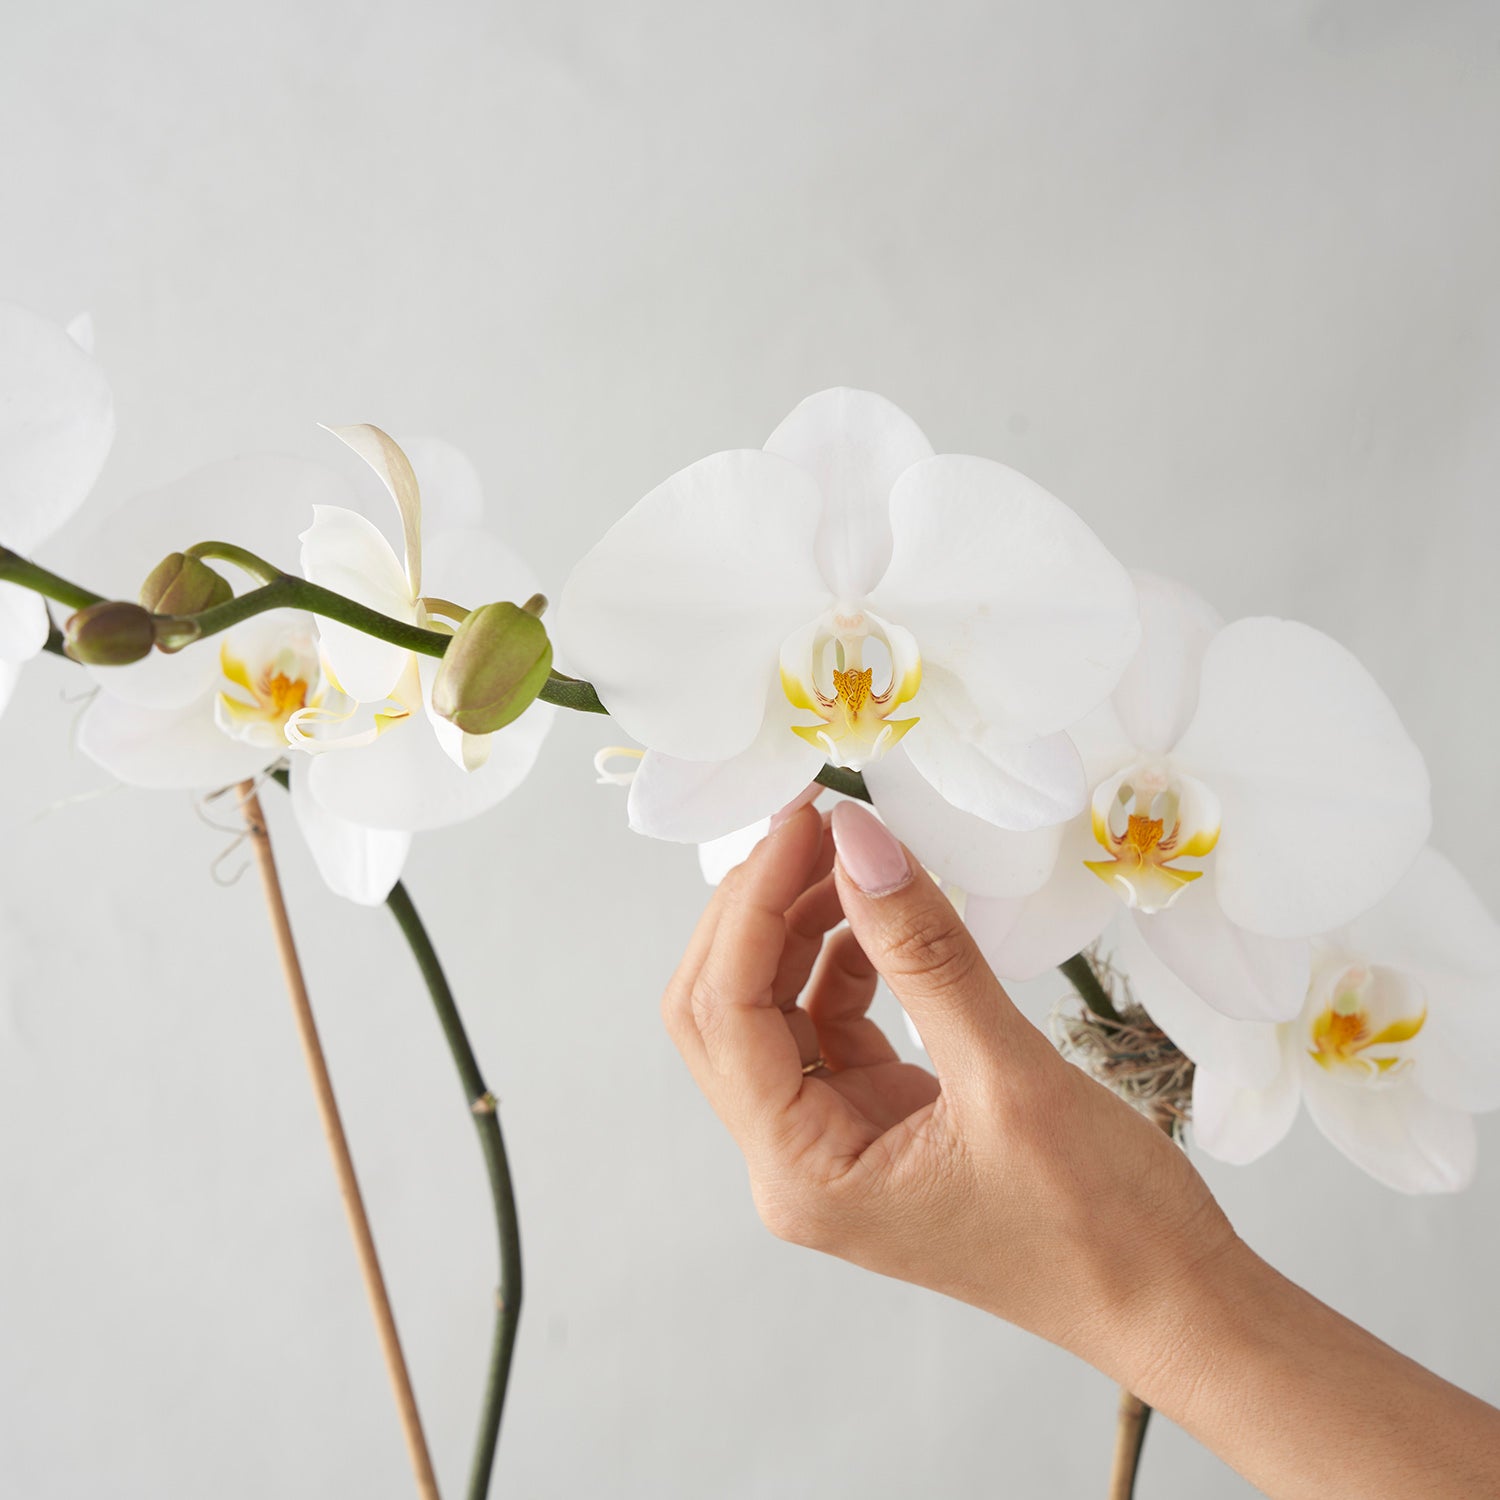 Closeup of hand coming from right side touching white phalaenopsis flower on white background.